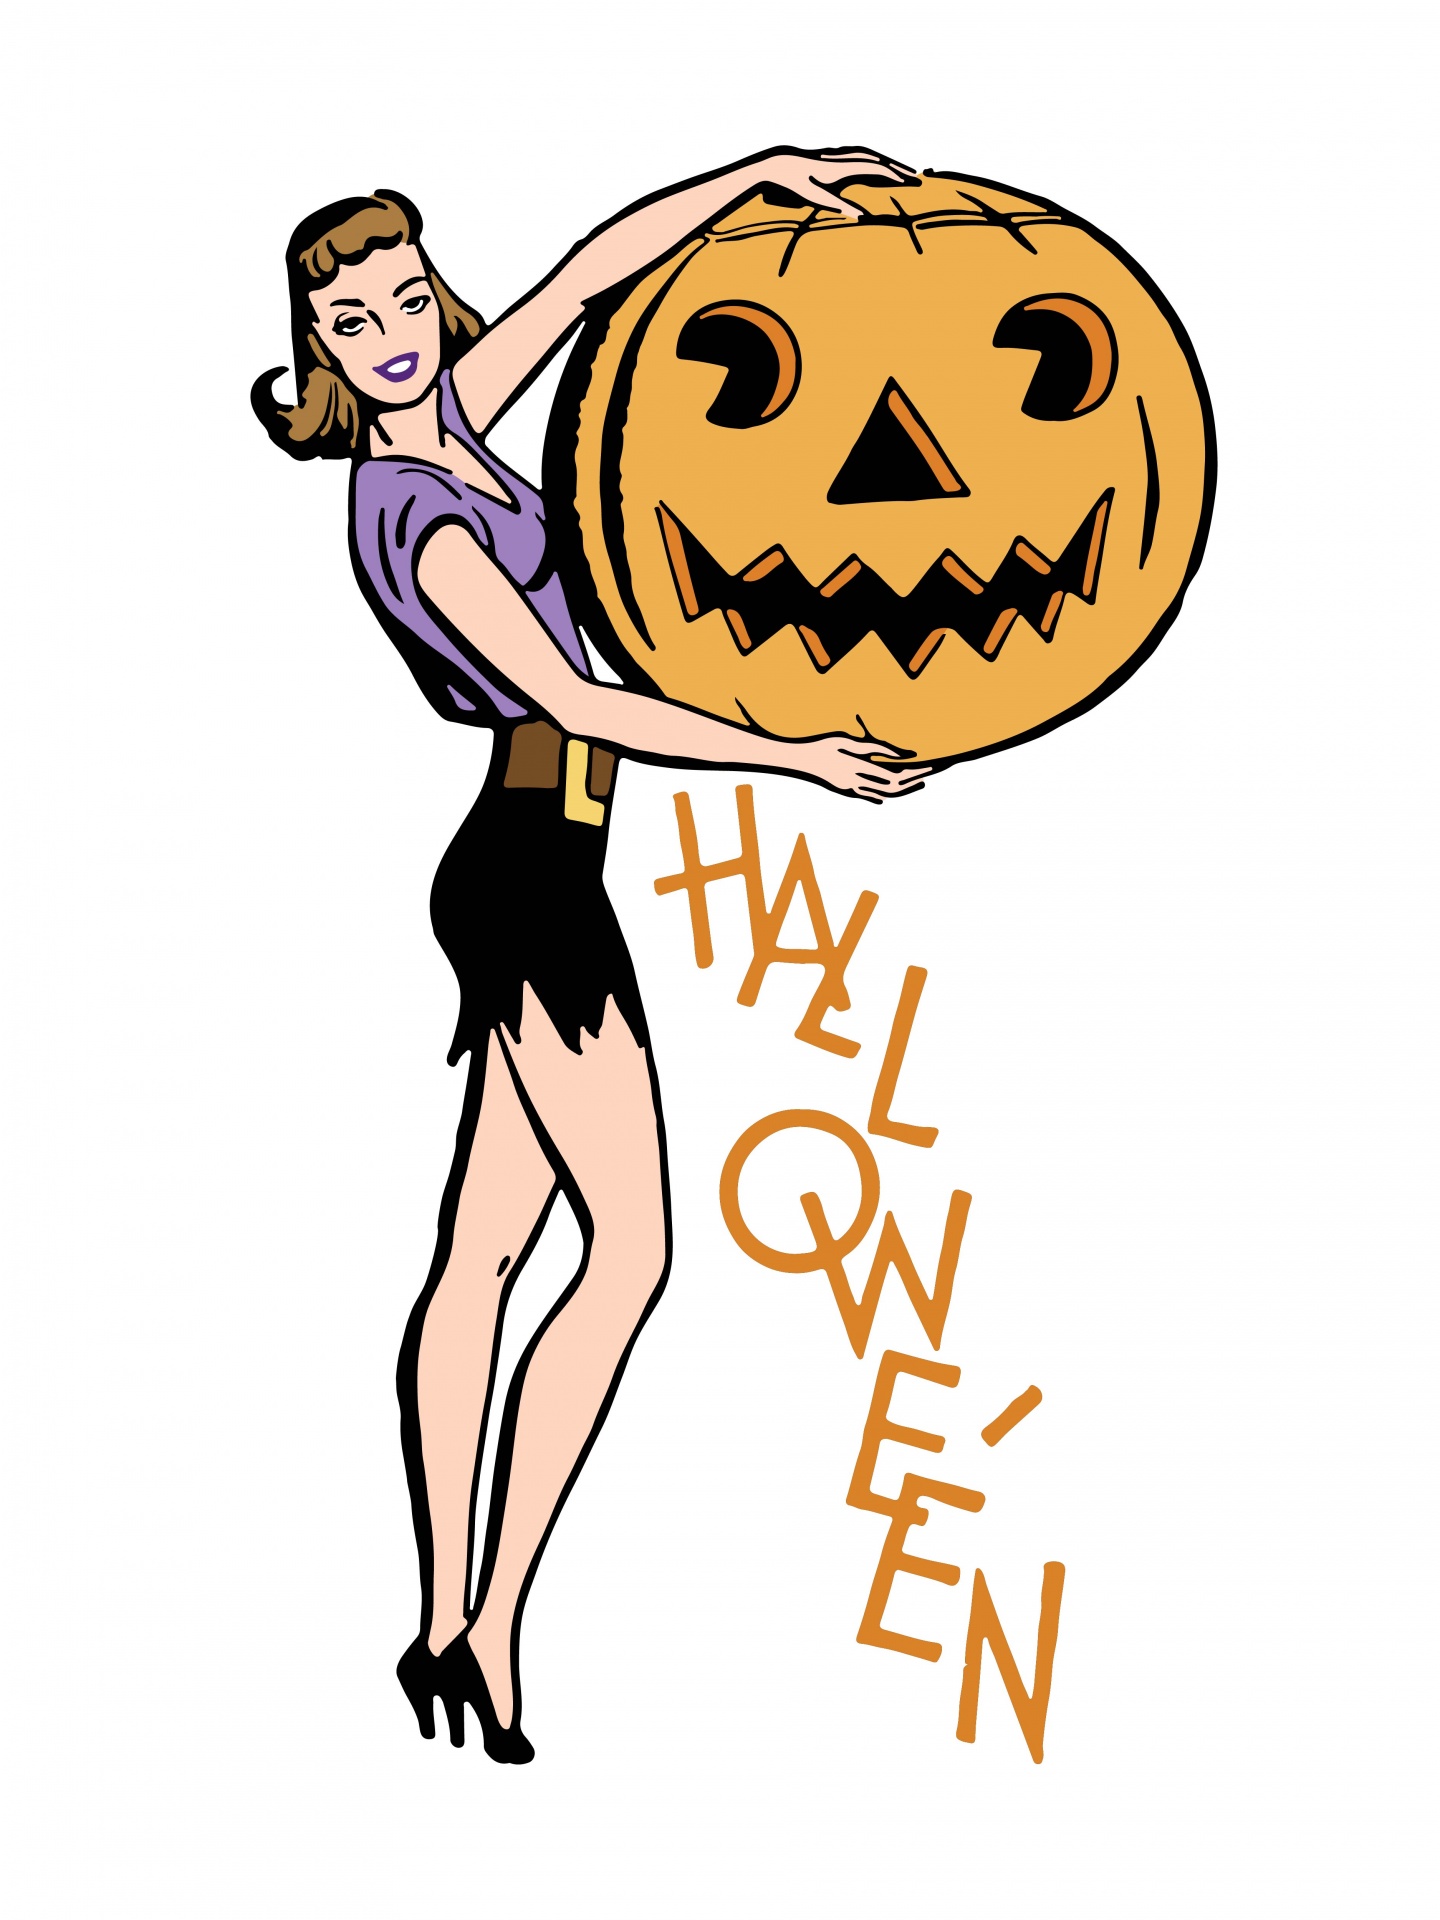 Retro, vintage, halloween pin up girl, woman holding a jack o’lantern, pumpkin vector art illustration isolated on white background